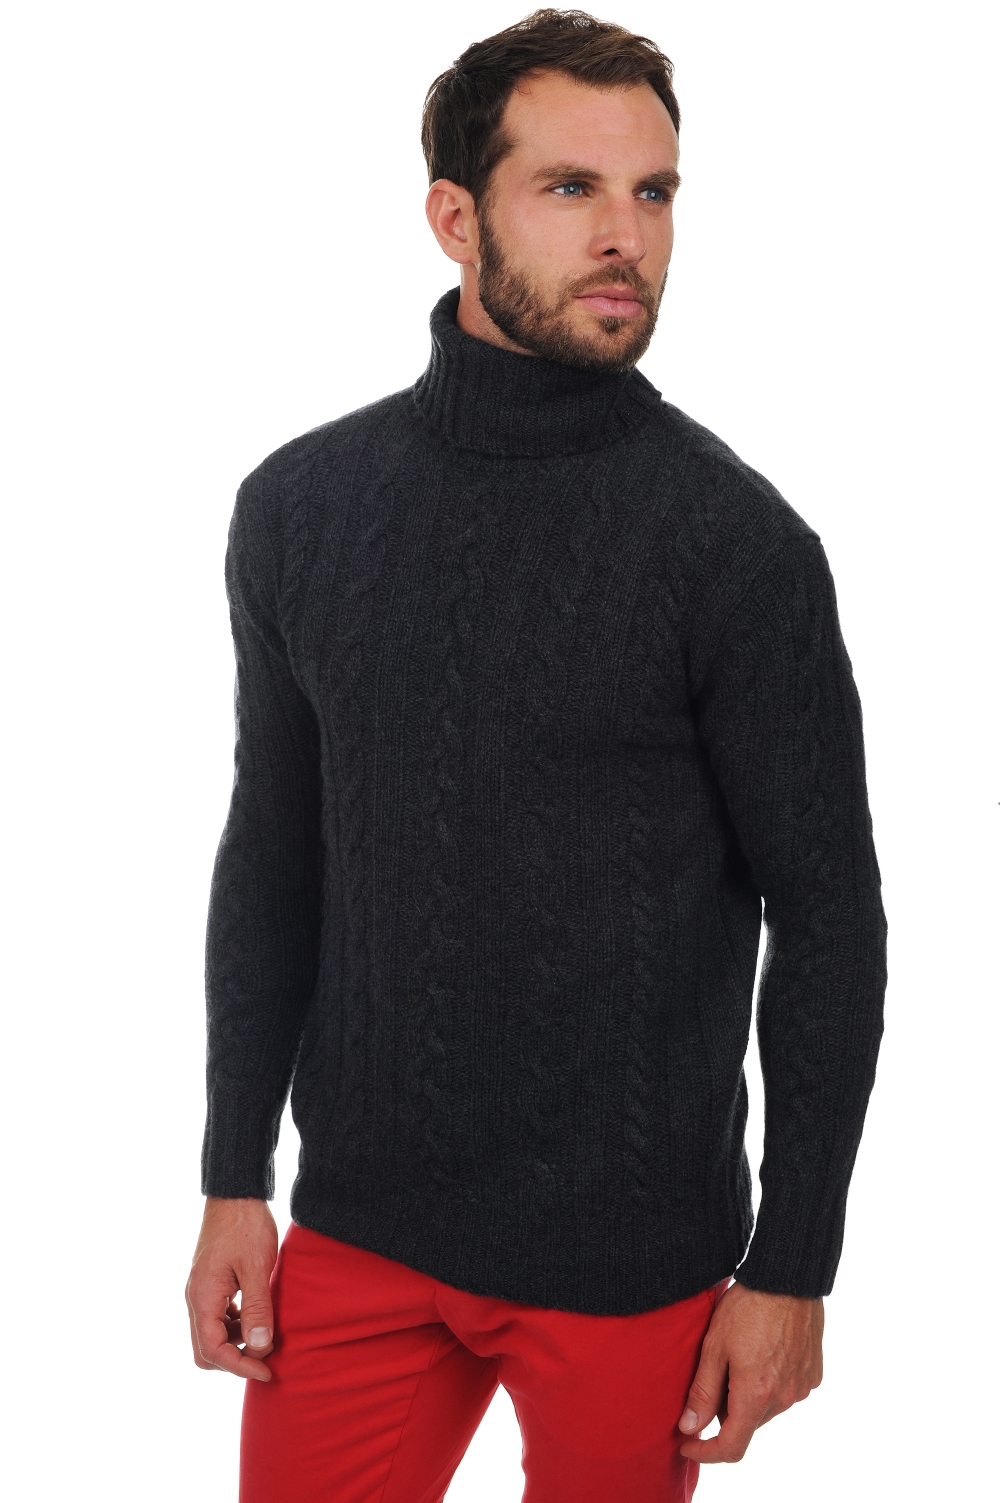 Cashmere men chunky sweater lucas charcoal marl s